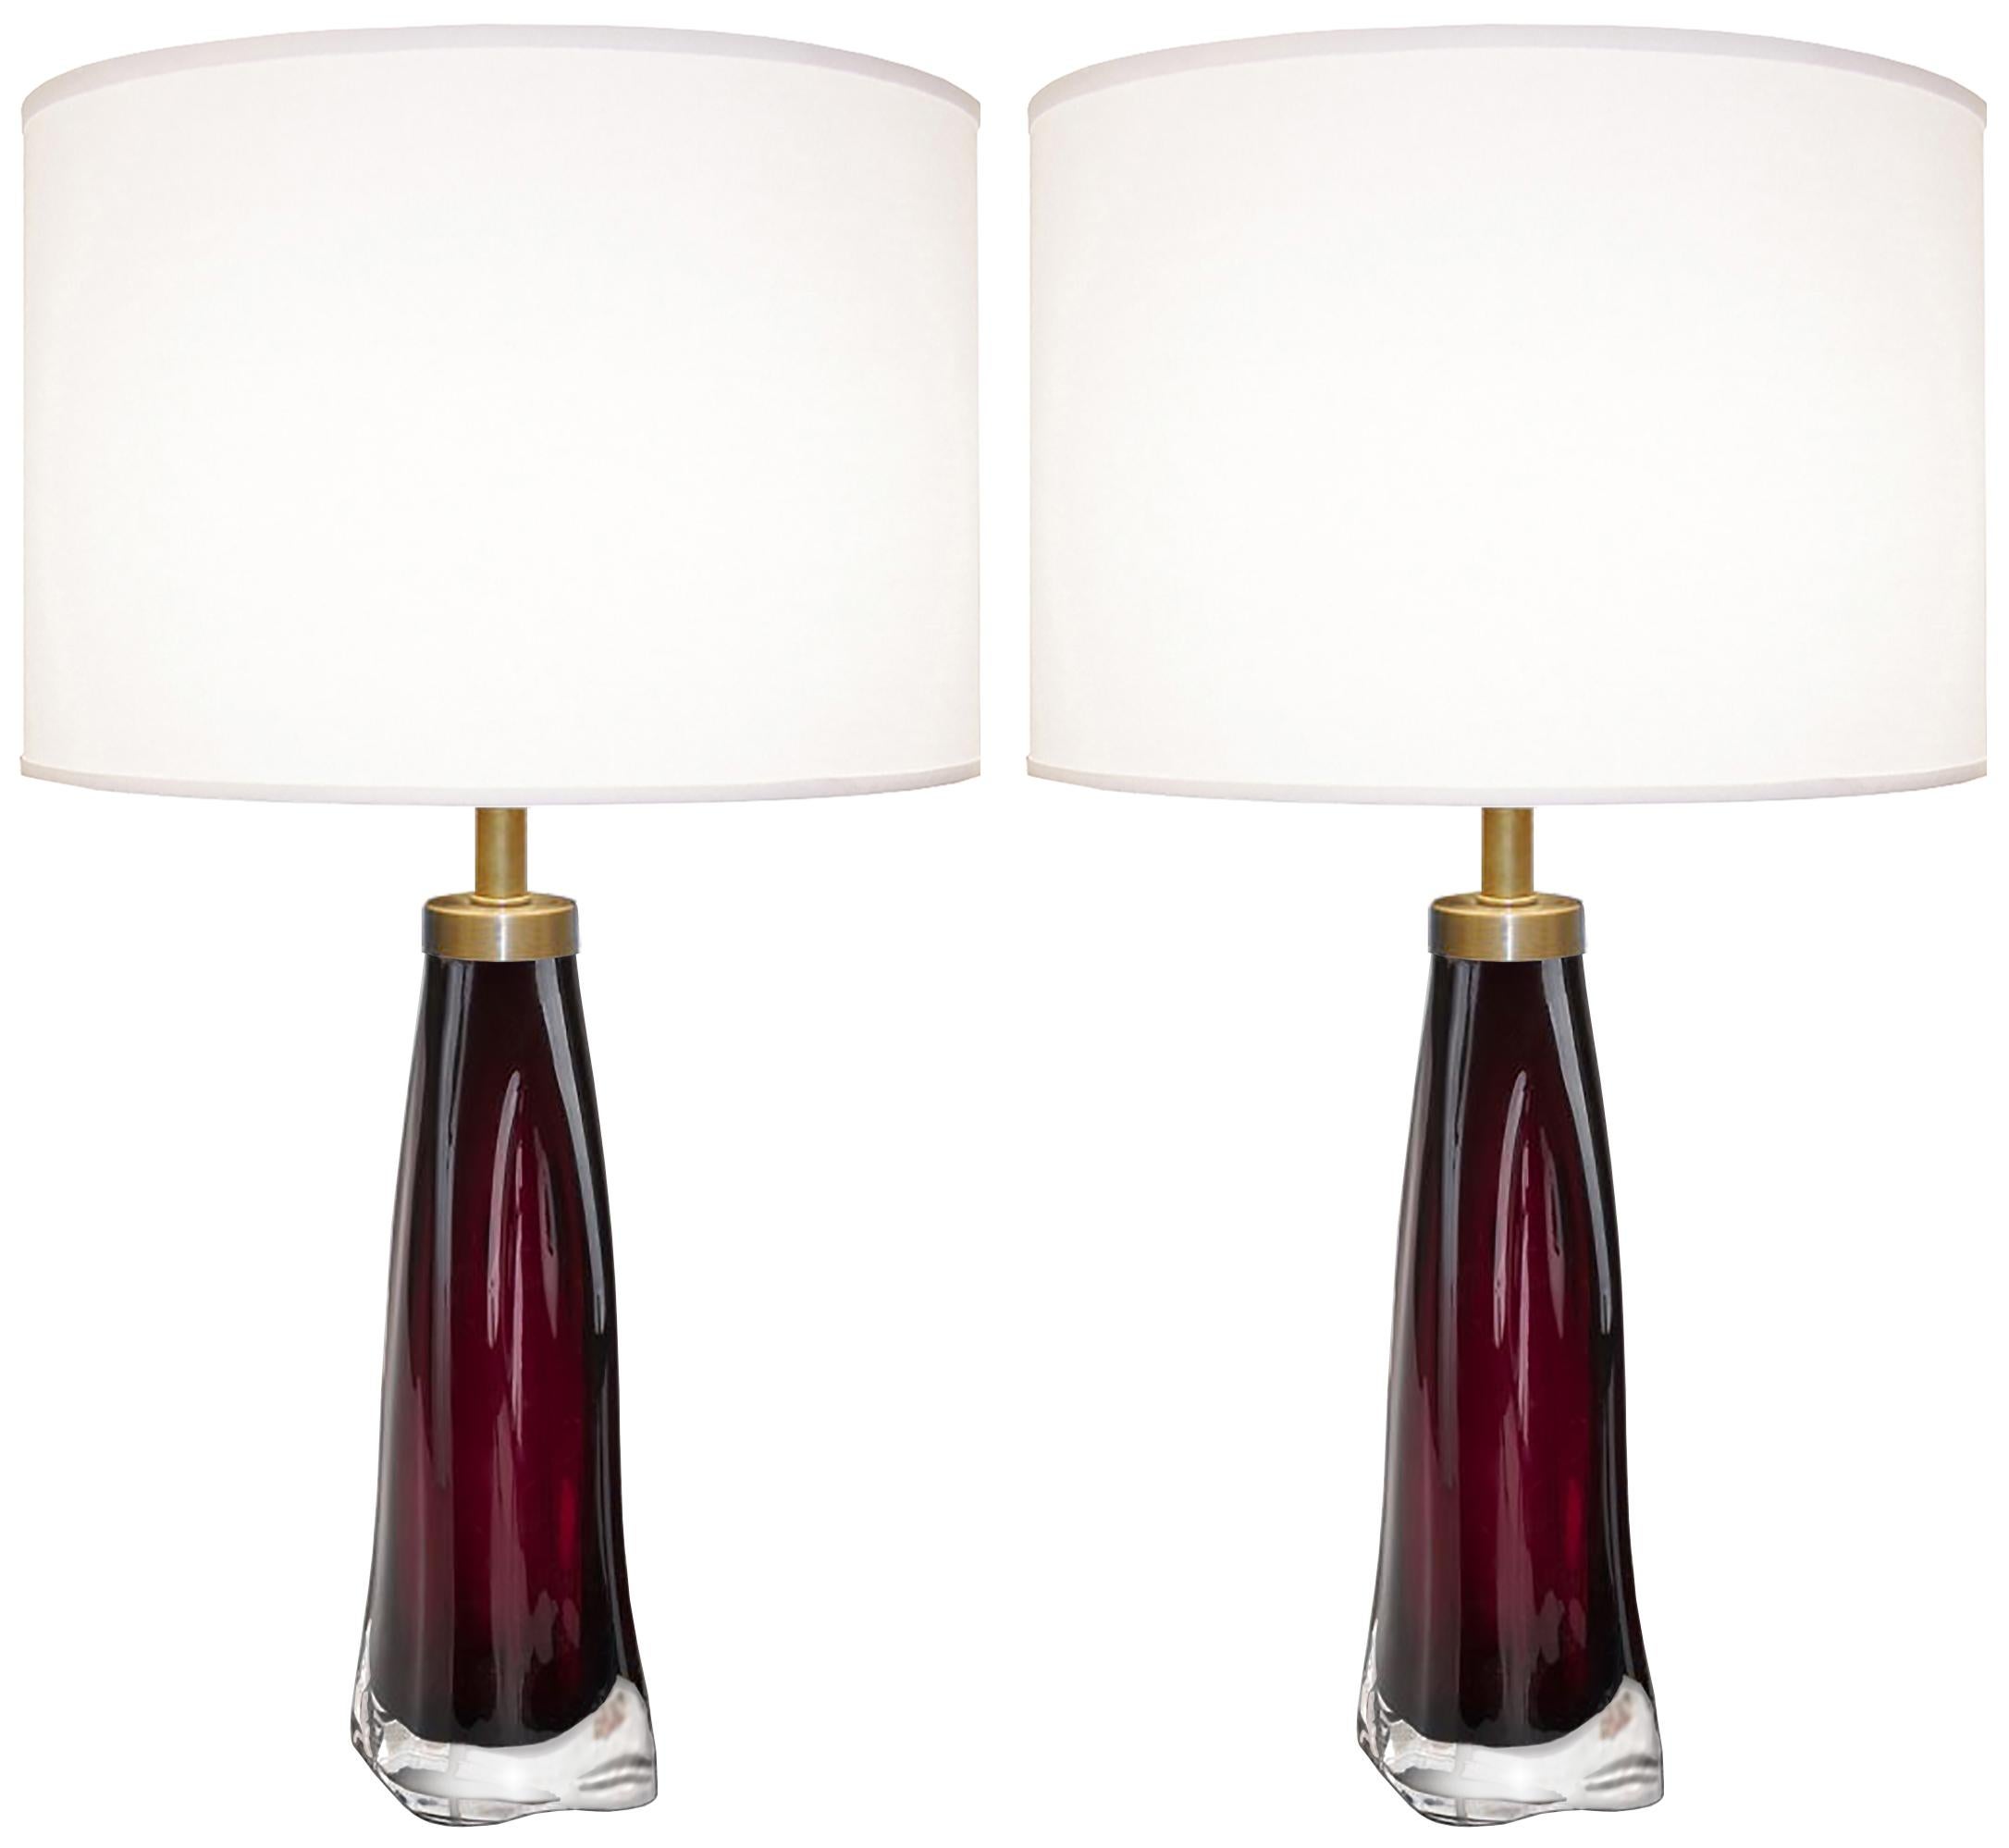 A pair of raspberry and clear glass lamps with brass hardware by Carl Fagerlund for Orrefors, Swedish, 1950s.